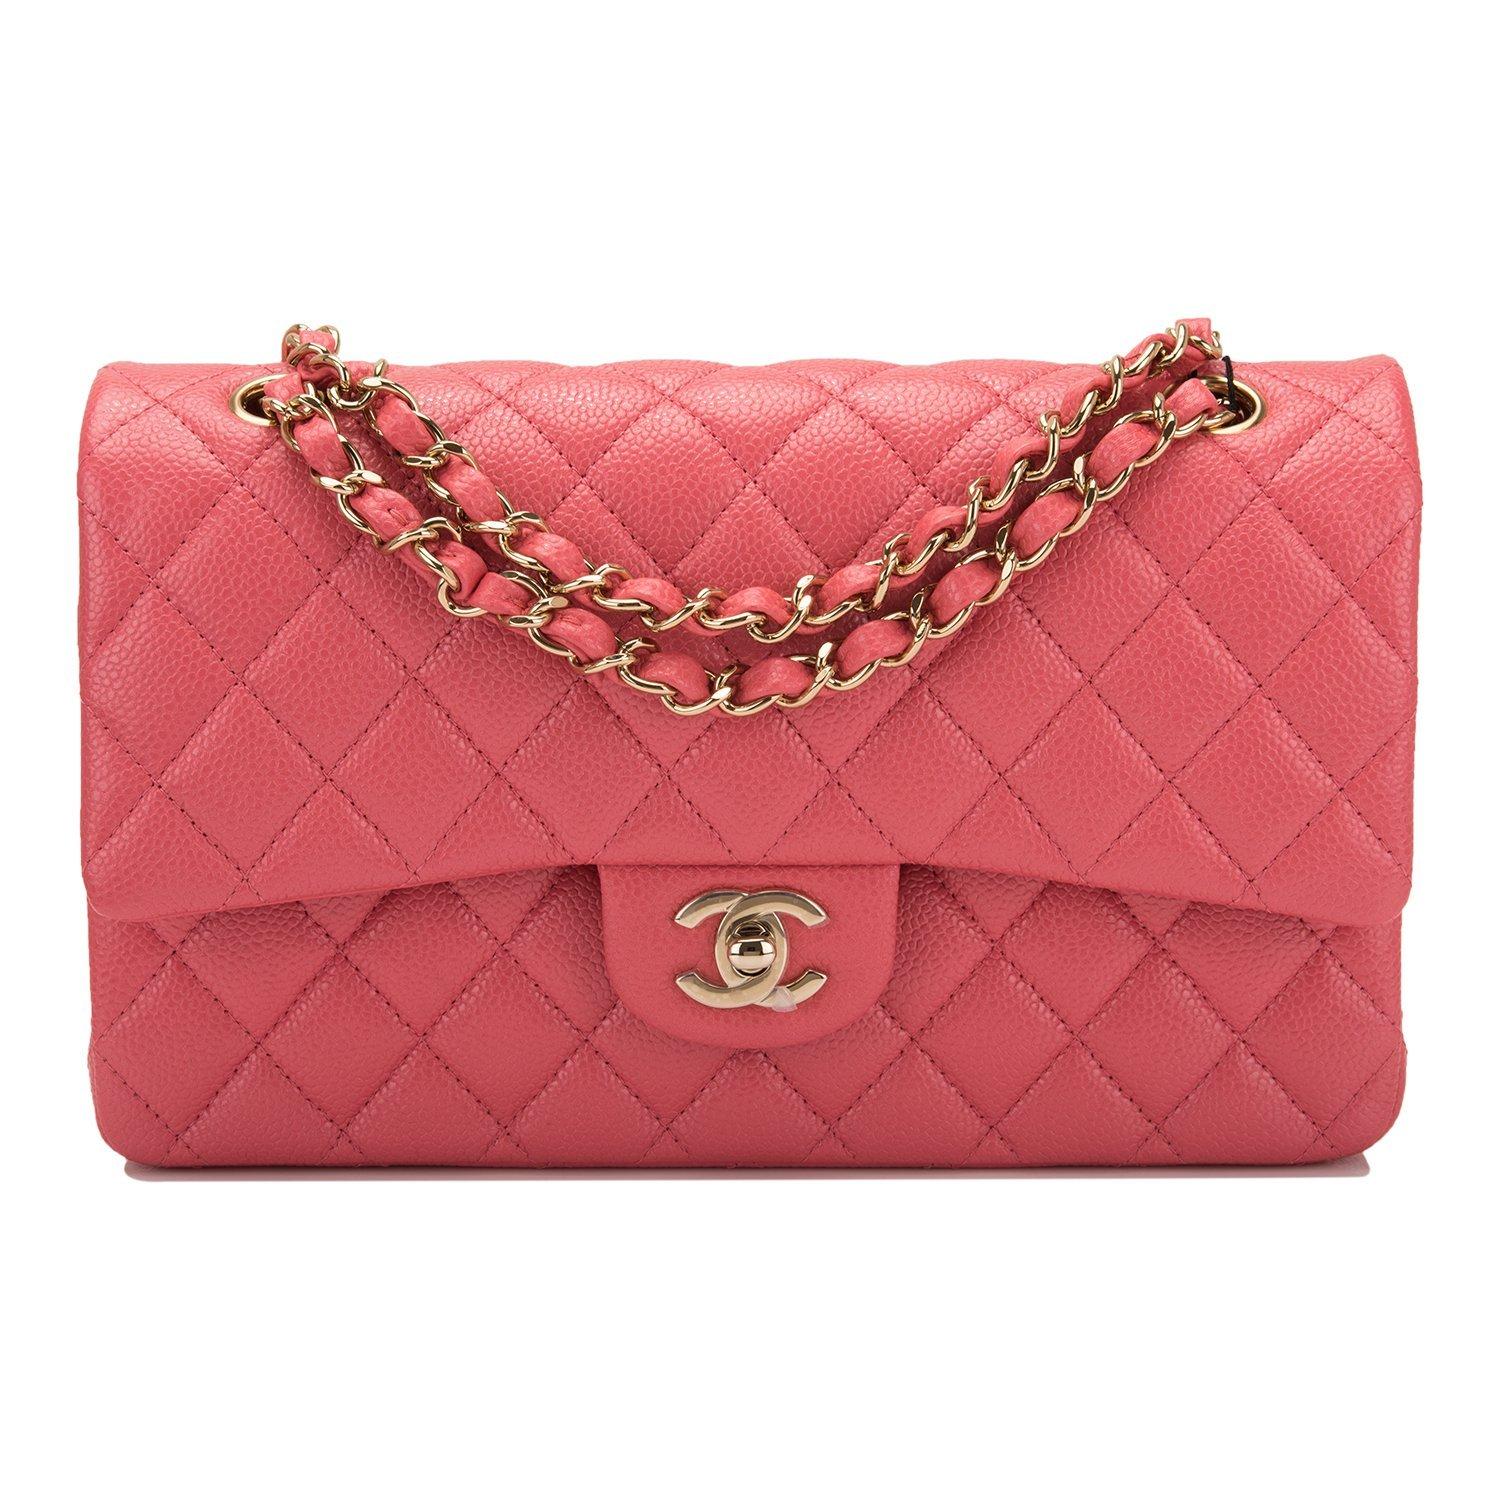 Chanel Pink Shiny Quilted Caviar Medium Classic Double Flap Bag A01112Y83470

Chanel Medium Classic double flap bag of pink shiny quilted caviar leather with light gold tone hardware.
This bag features a front flap with signature CC turnlock